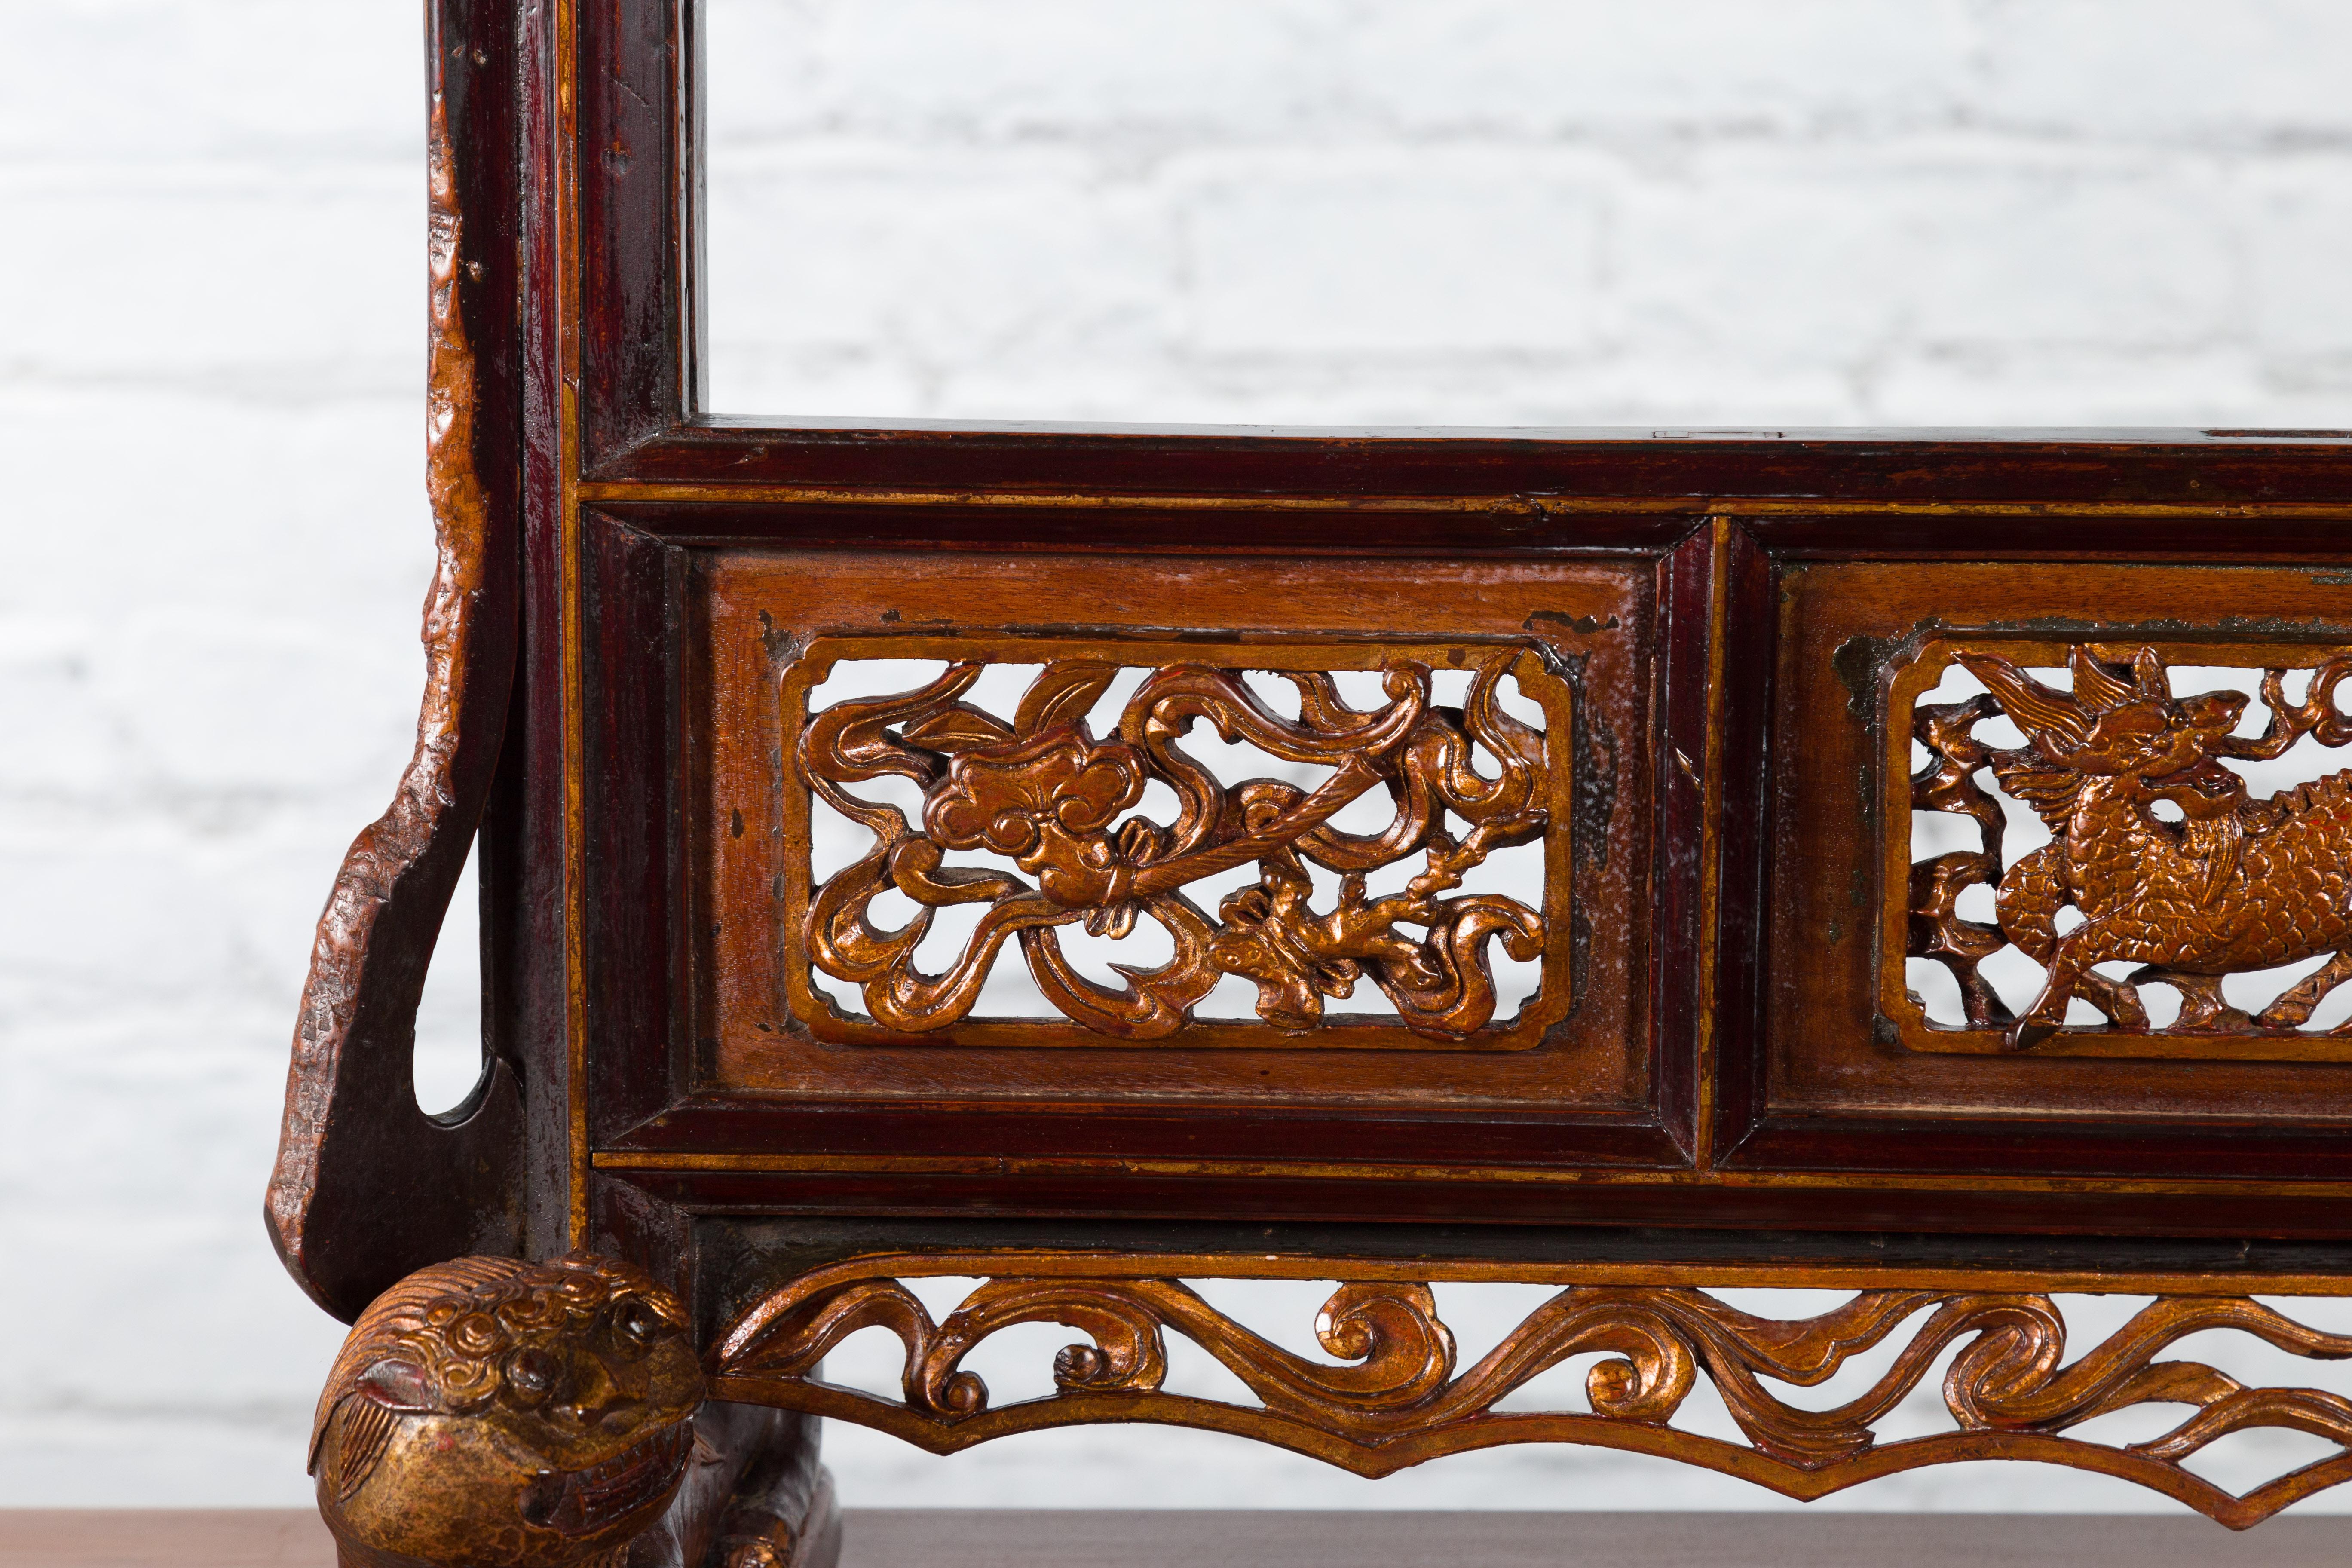 Wood Chinese Qing Dynasty 18th Century Mirror Frame with Hand-Carved Mythical Motifs